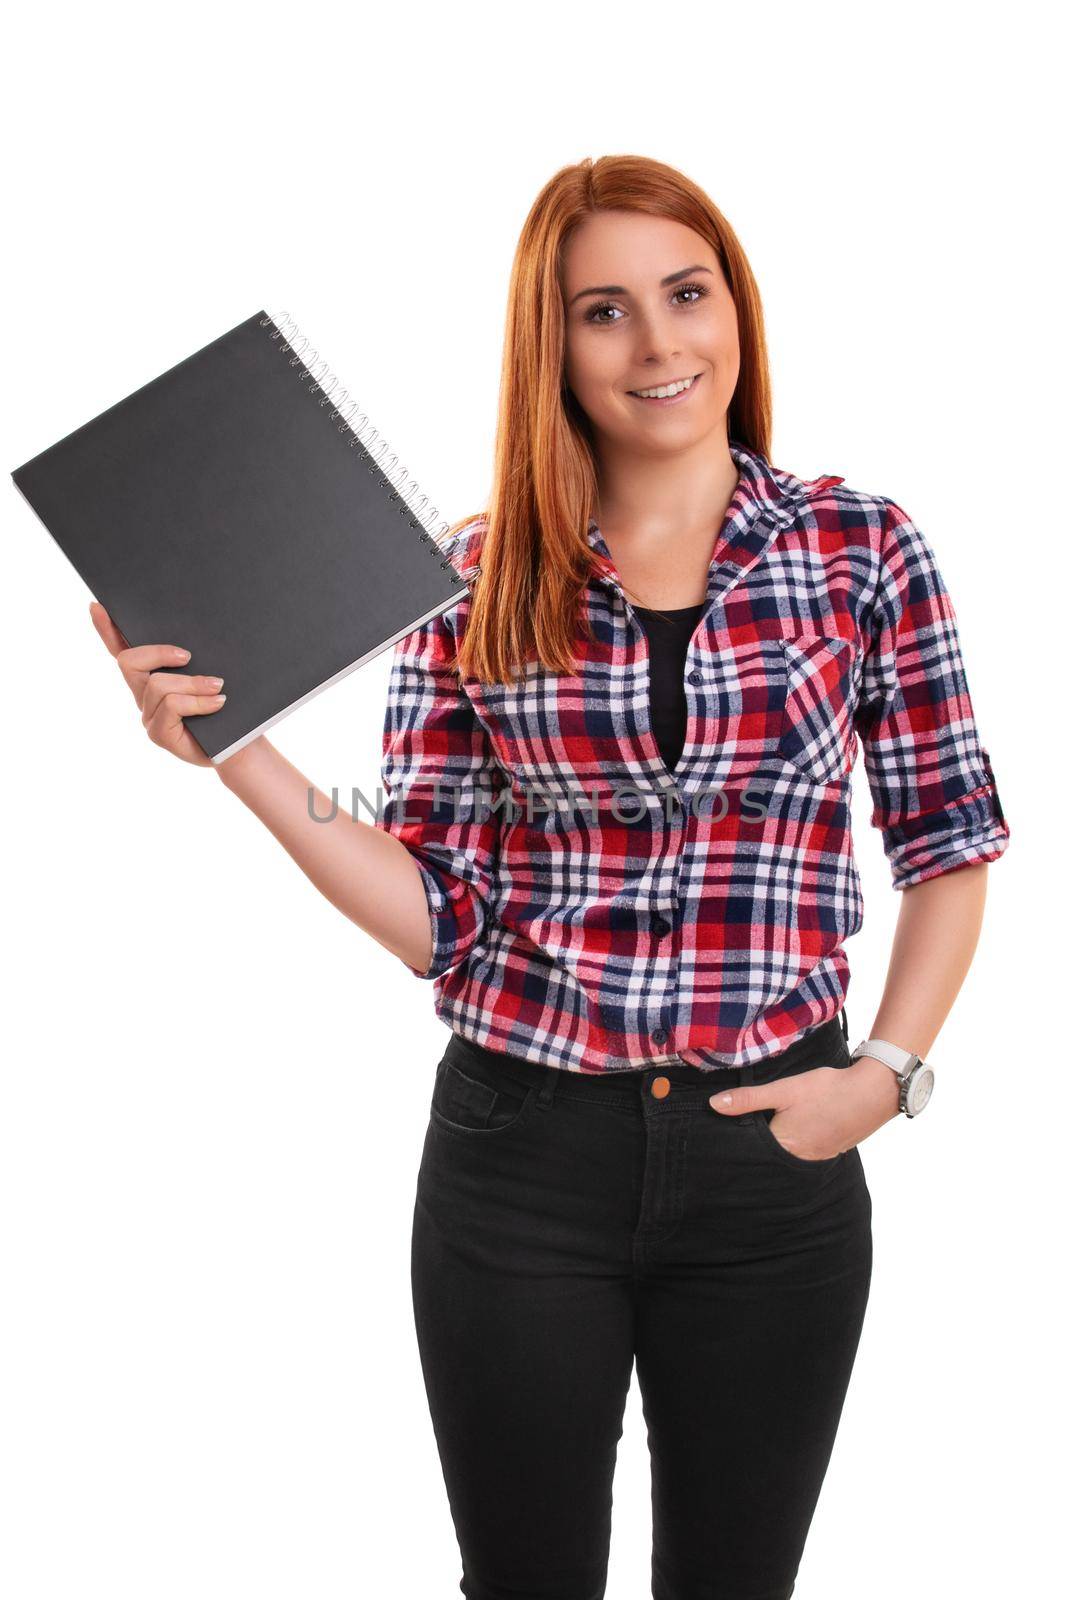 Smiling young redhead woman holding a notebook by Mendelex